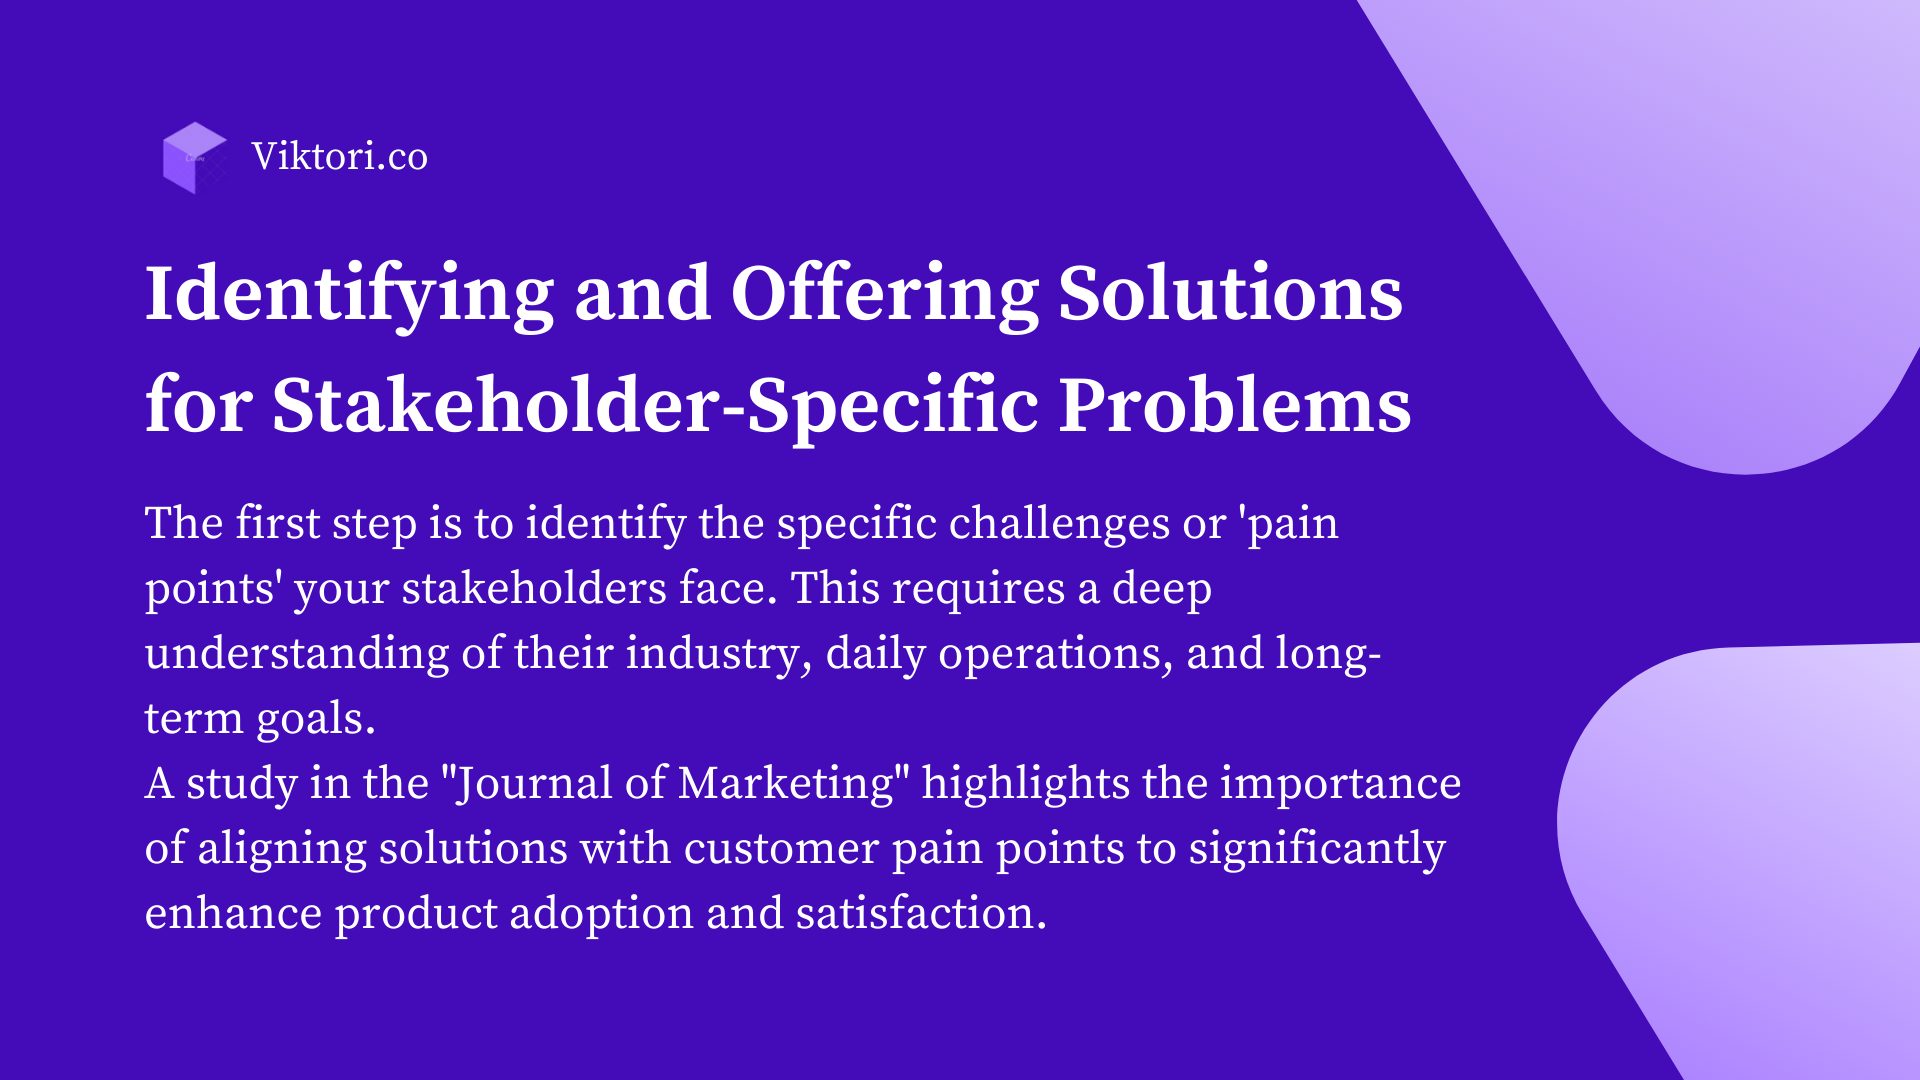 ID solutions to solve specific problems